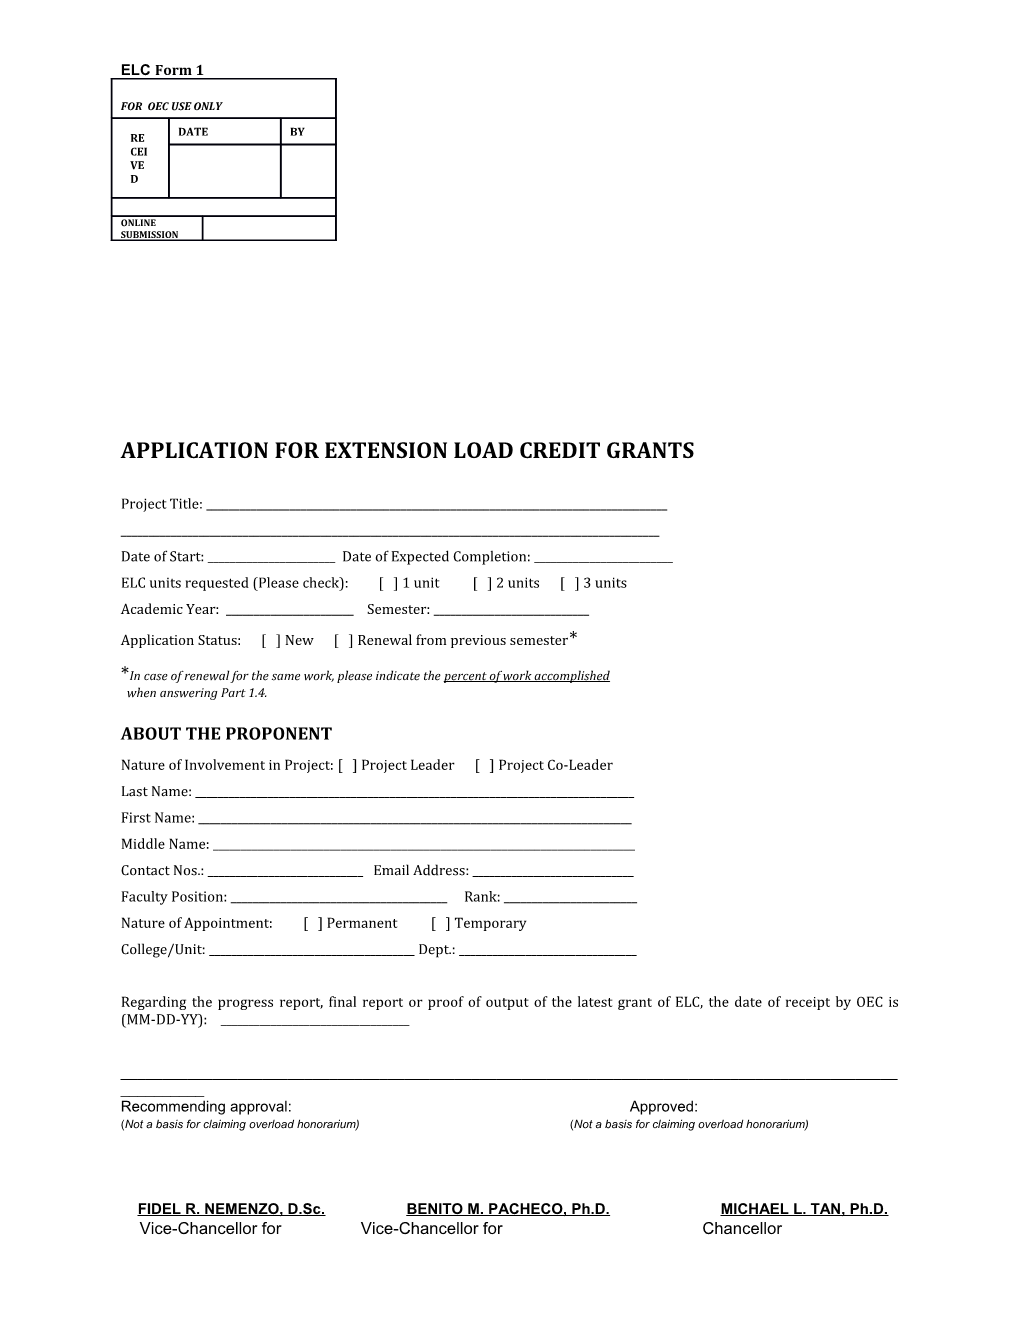 Application for Extension Load Credit Grants